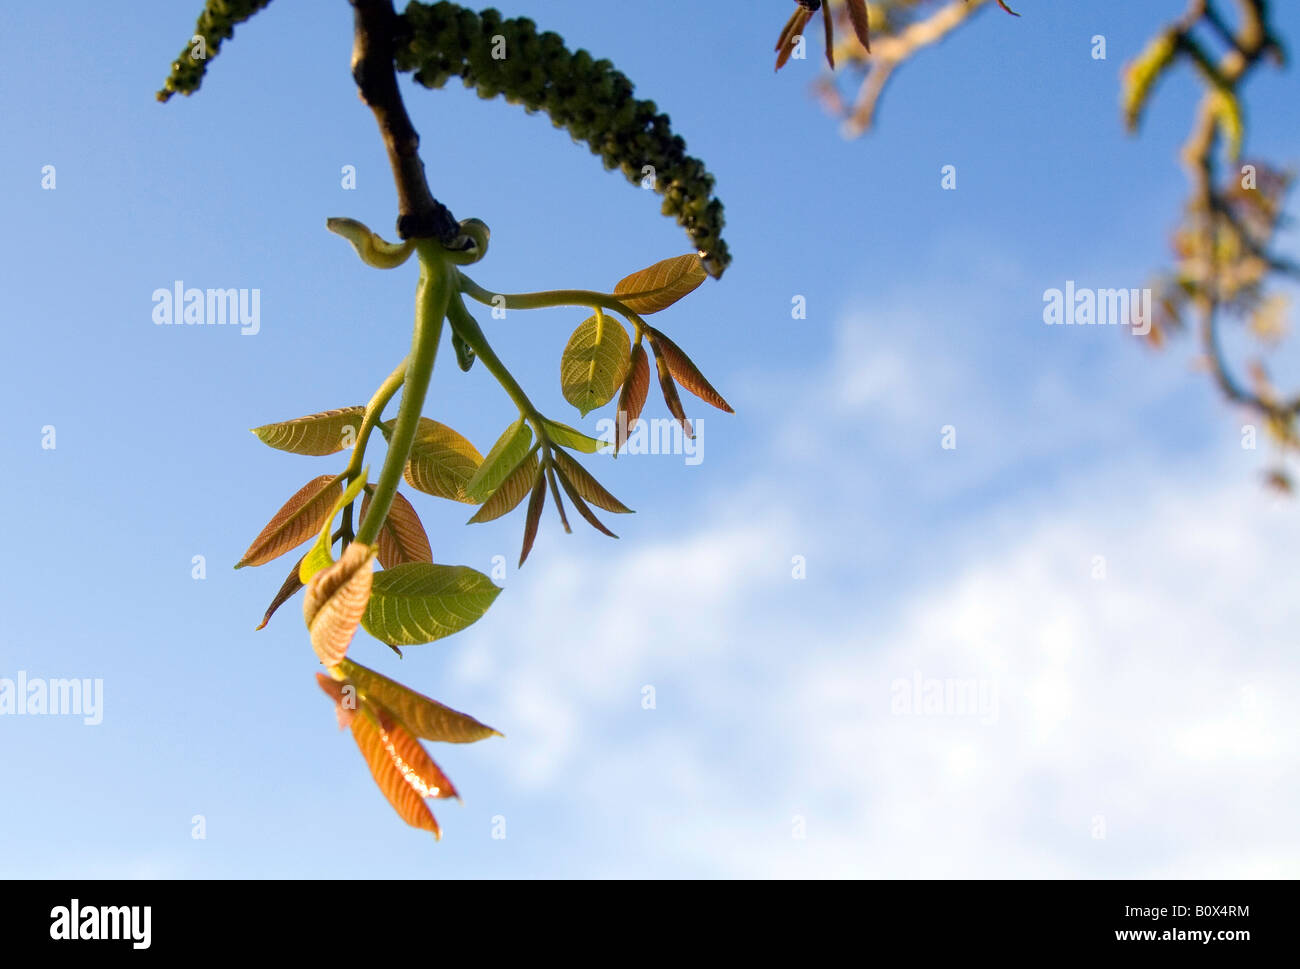 Spring nut tree leaves agains the blue sky. Stock Photo